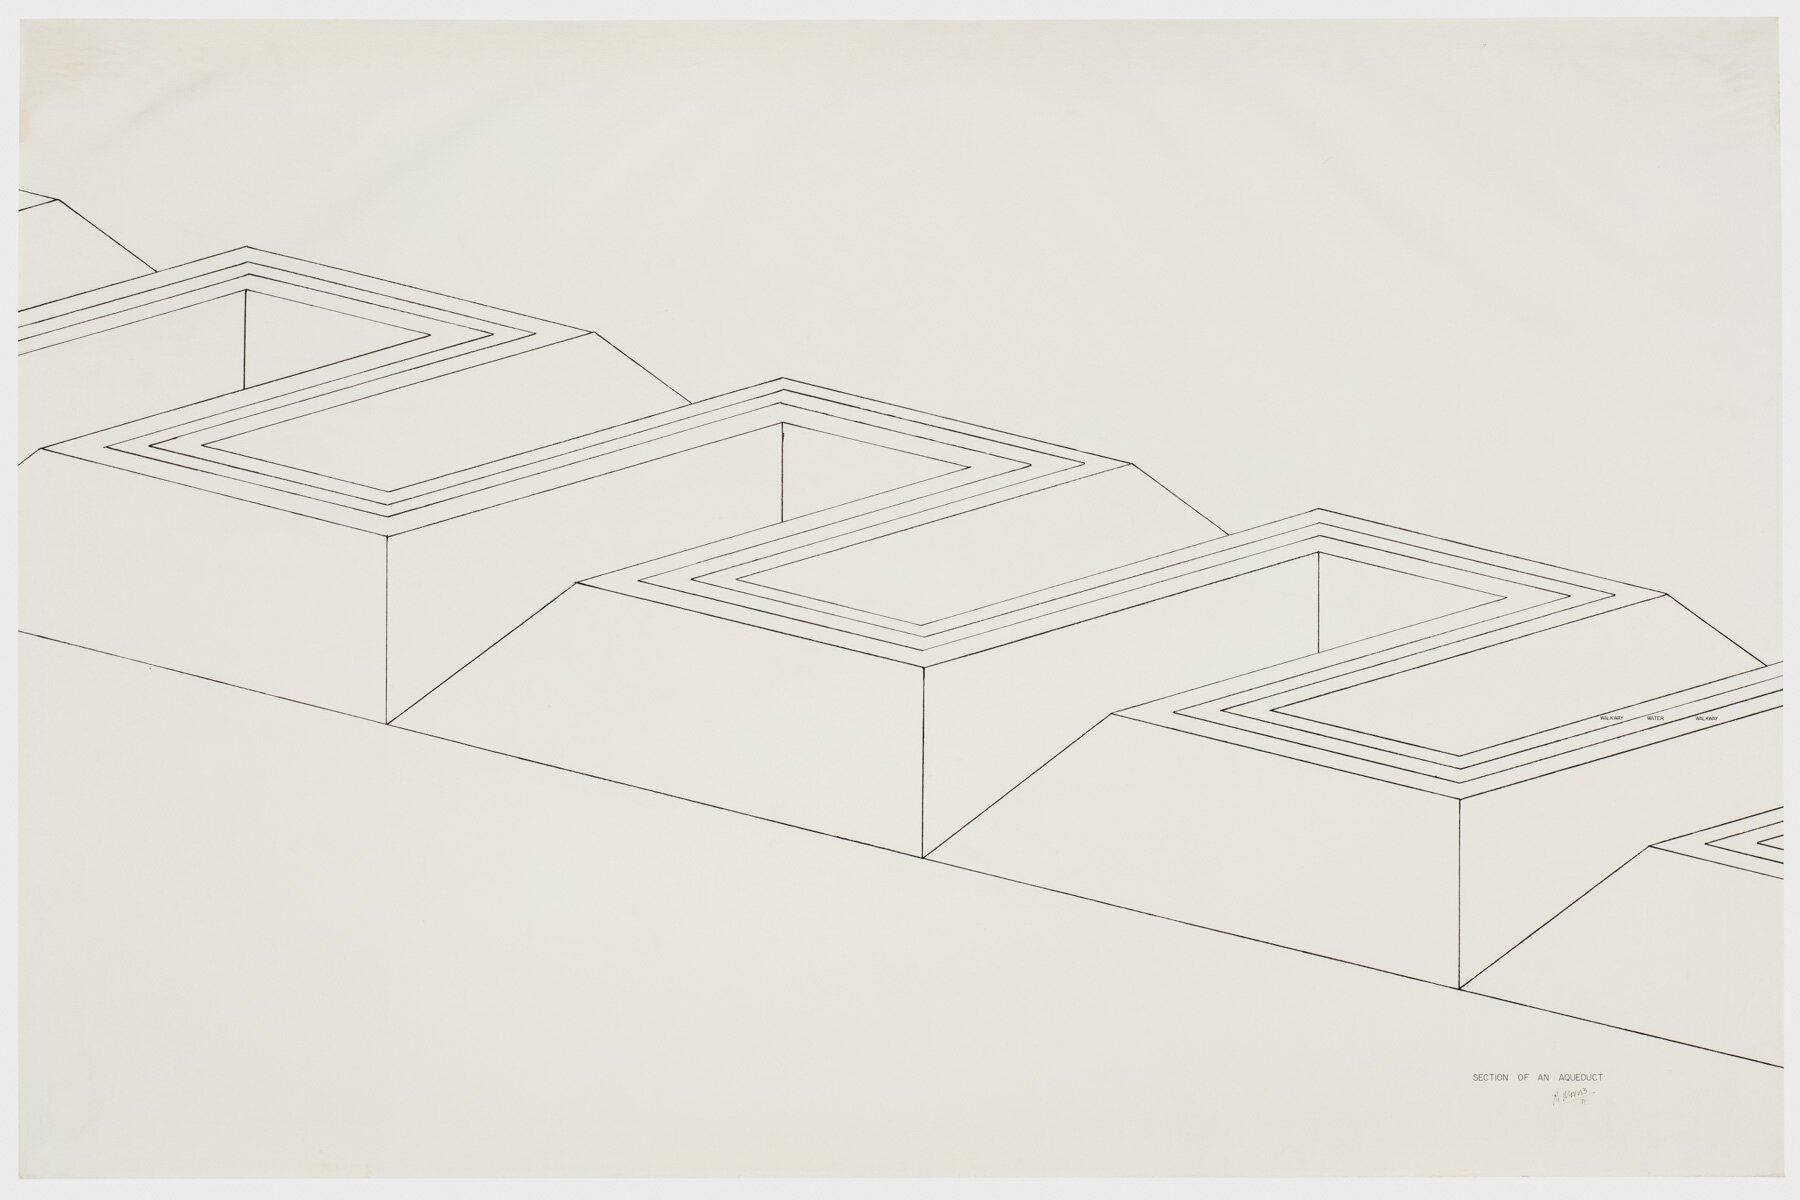  Robert Morris. Section of an Aqueduct, 1971. Ink on paper, 42 x 64 in. (107 x 163 cm). Estate of Robert Morris, courtesy Castelli Gallery, New York. © 2019 The Estate of Robert Morris / Artists Rights Society (ARS), New York. Photo: Stan Narten 